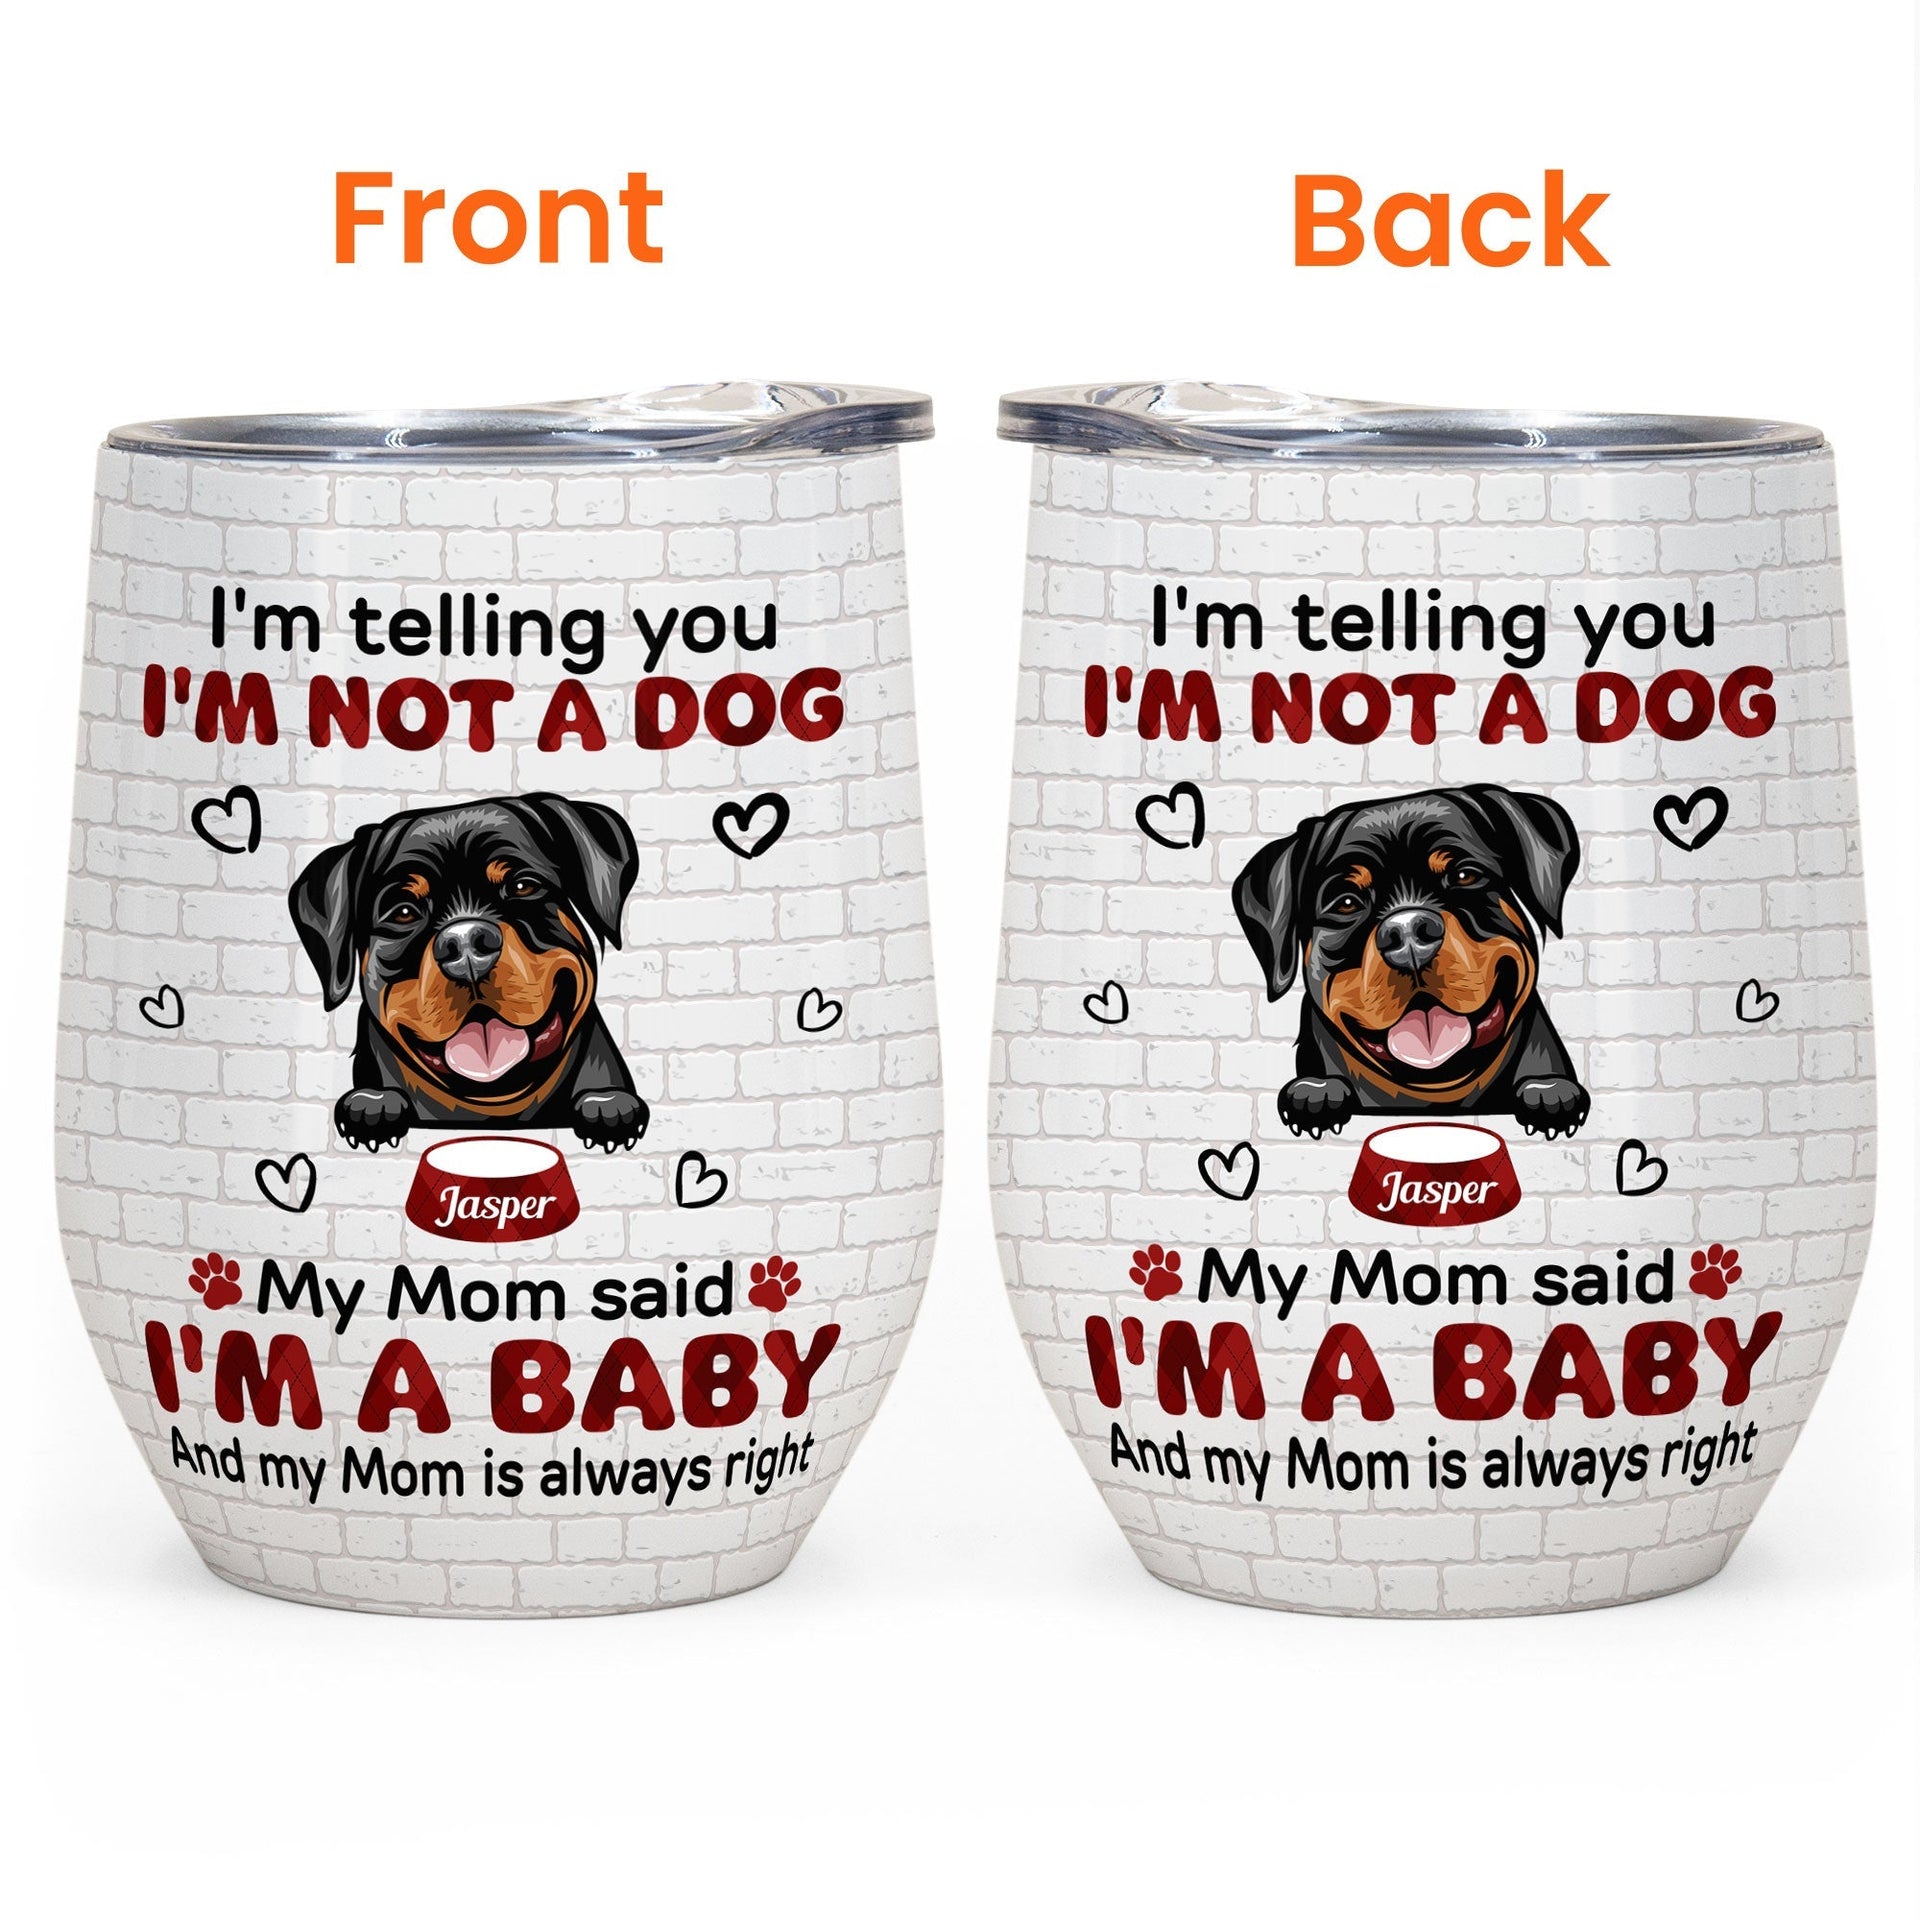 My Mom Said I'm A Baby - Personalized Wine Tumbler - Birthday, Loving Gift For Cat & Dog Lover, Pet Owner, Pet Mom, Pet Dad